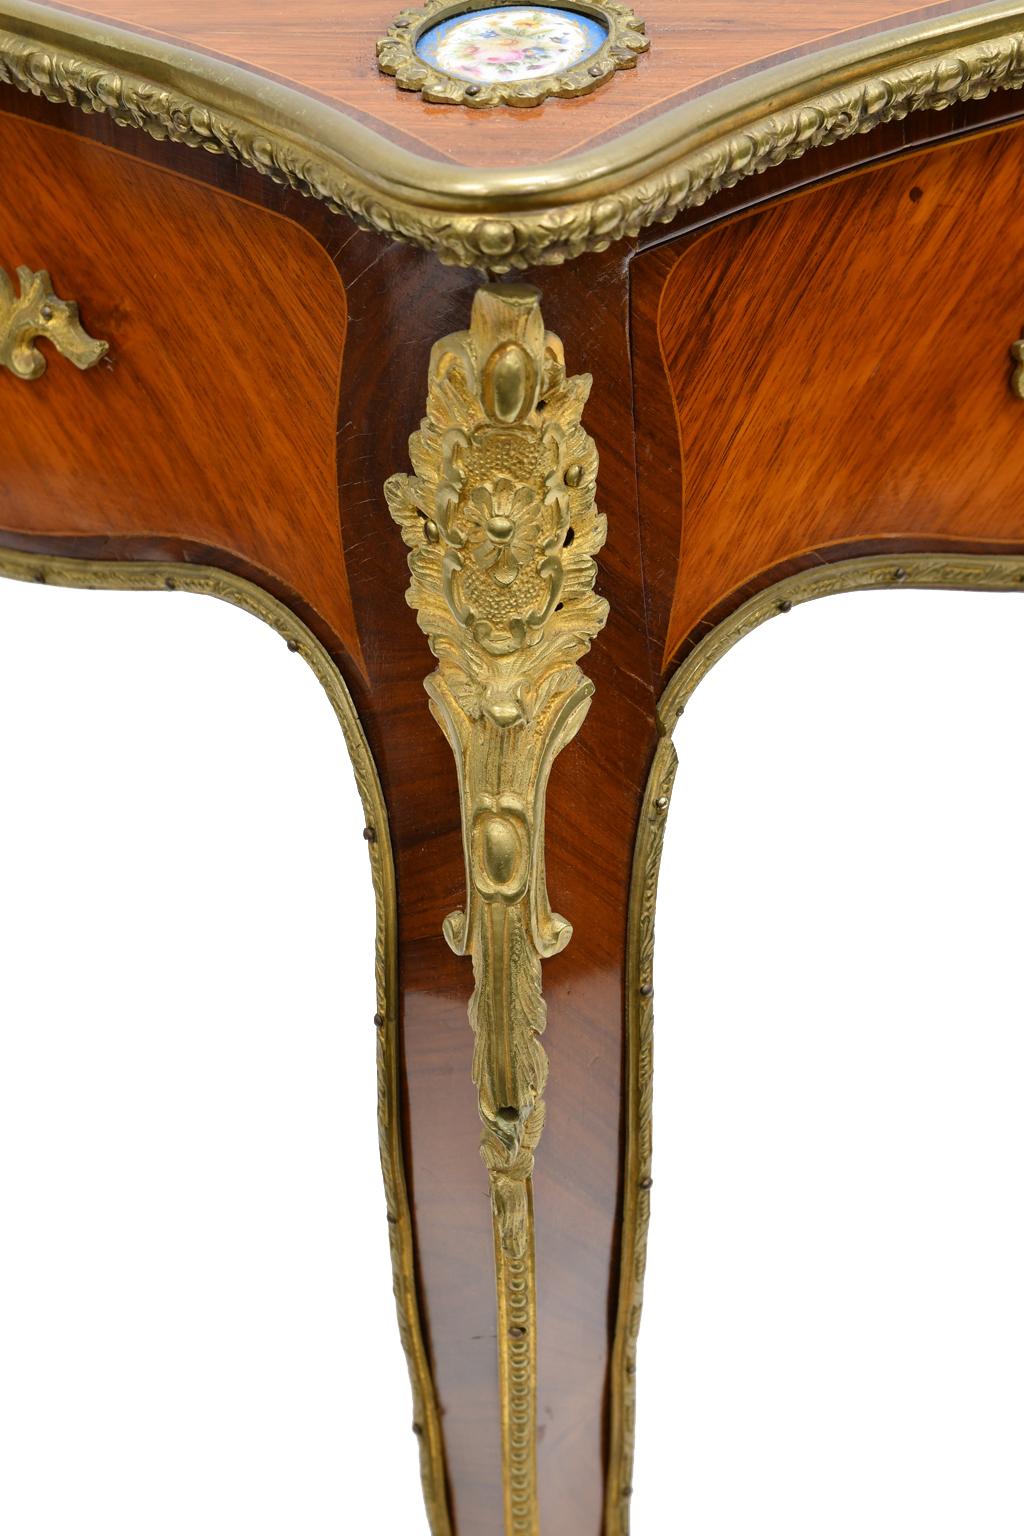 Kingwood French Louis XV Style Writing or Side Table with Parquetry, Leather and Ormolu